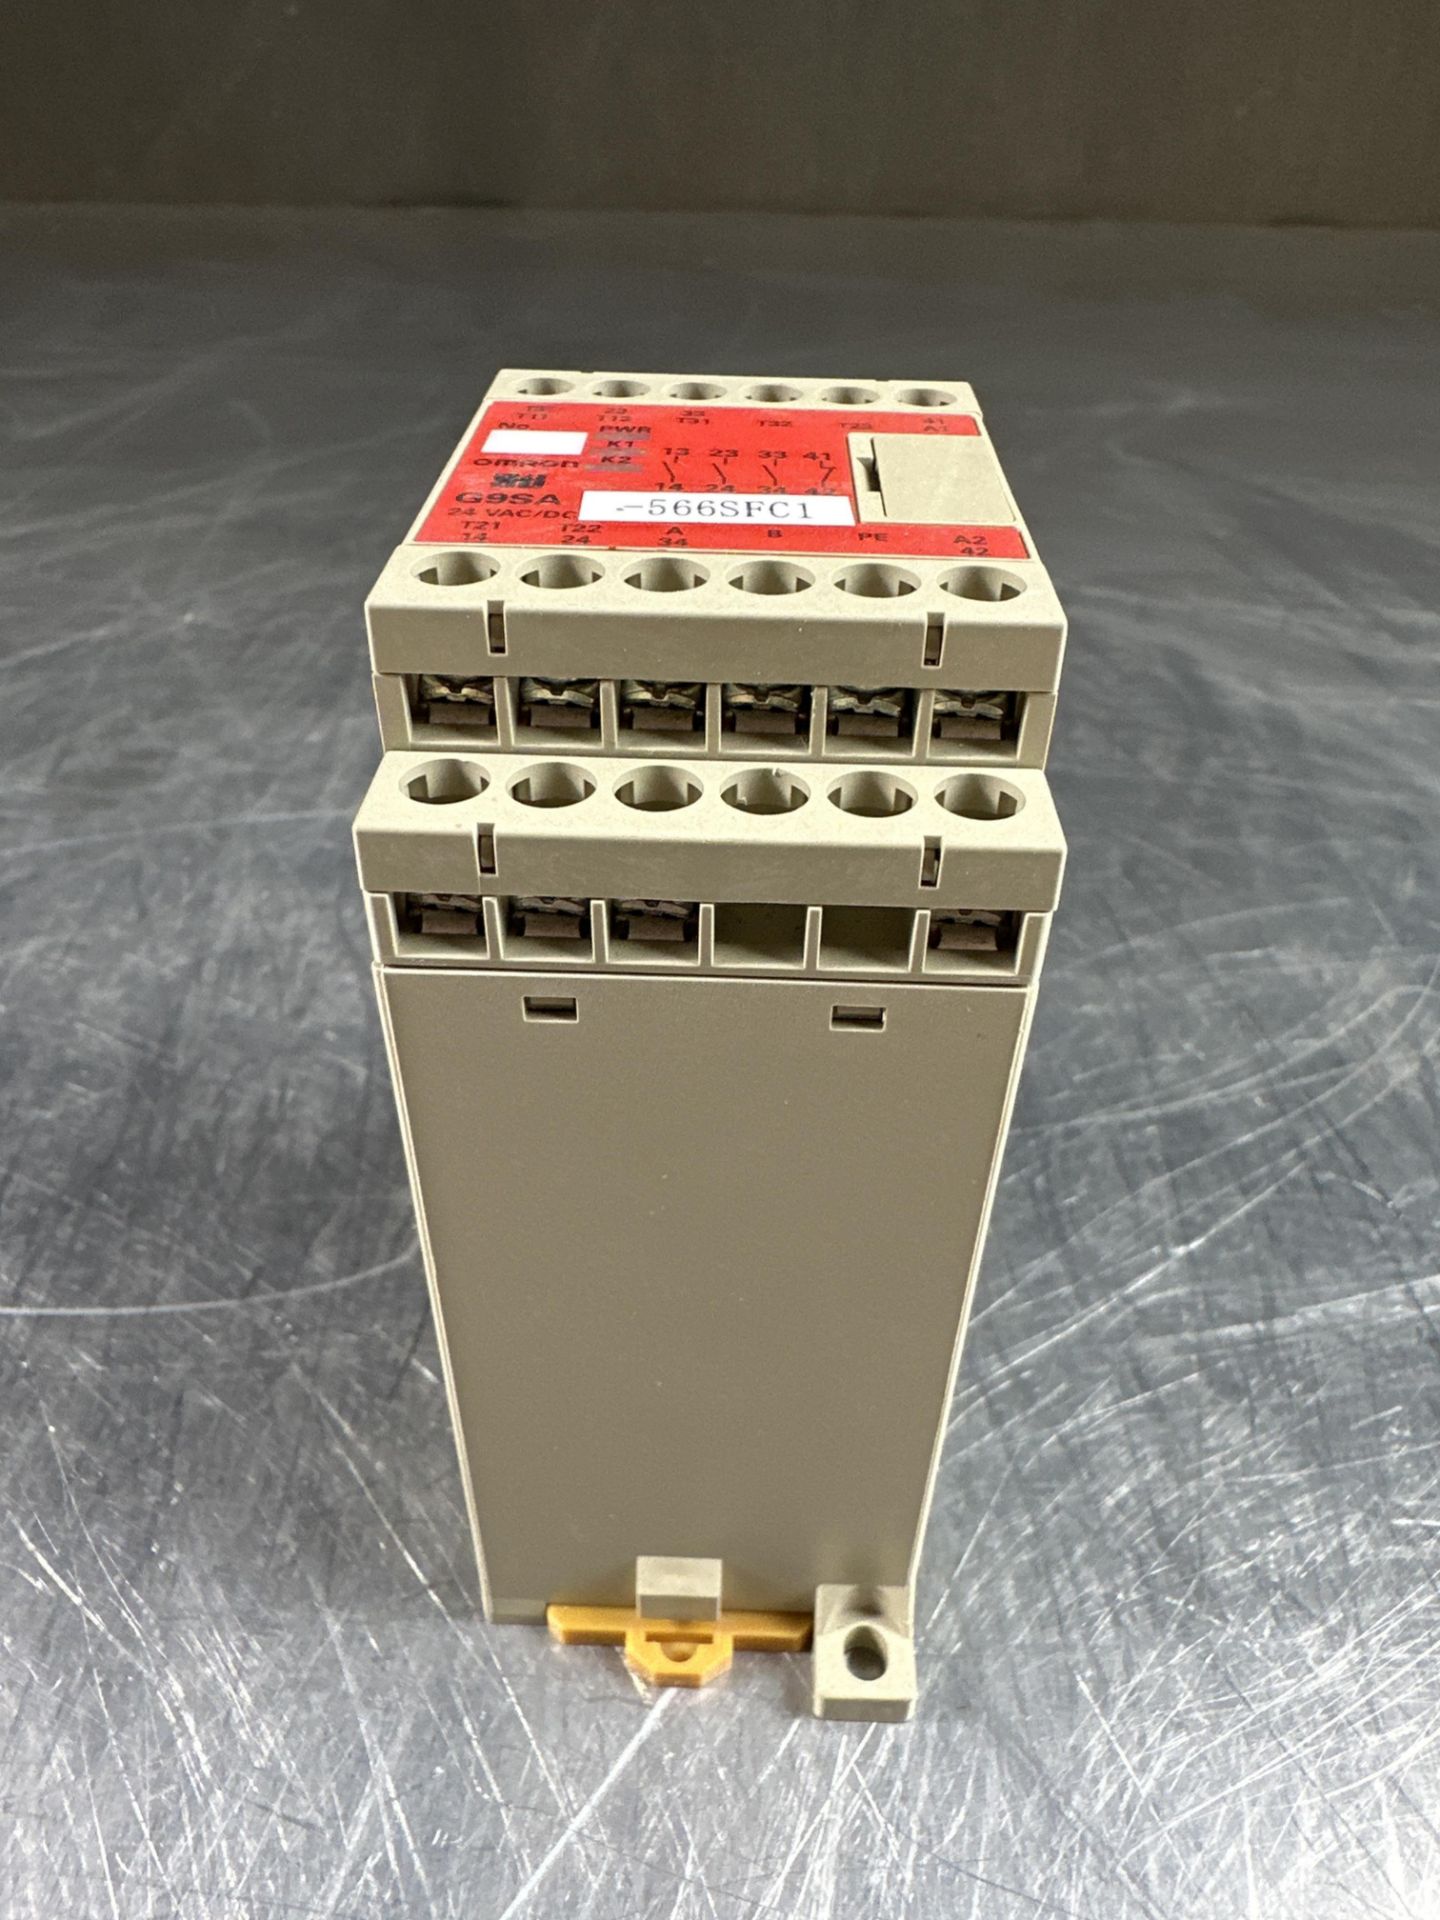 LOT OF 4 OMRON G9SA-301 SAFETY RELAYS - Image 5 of 5